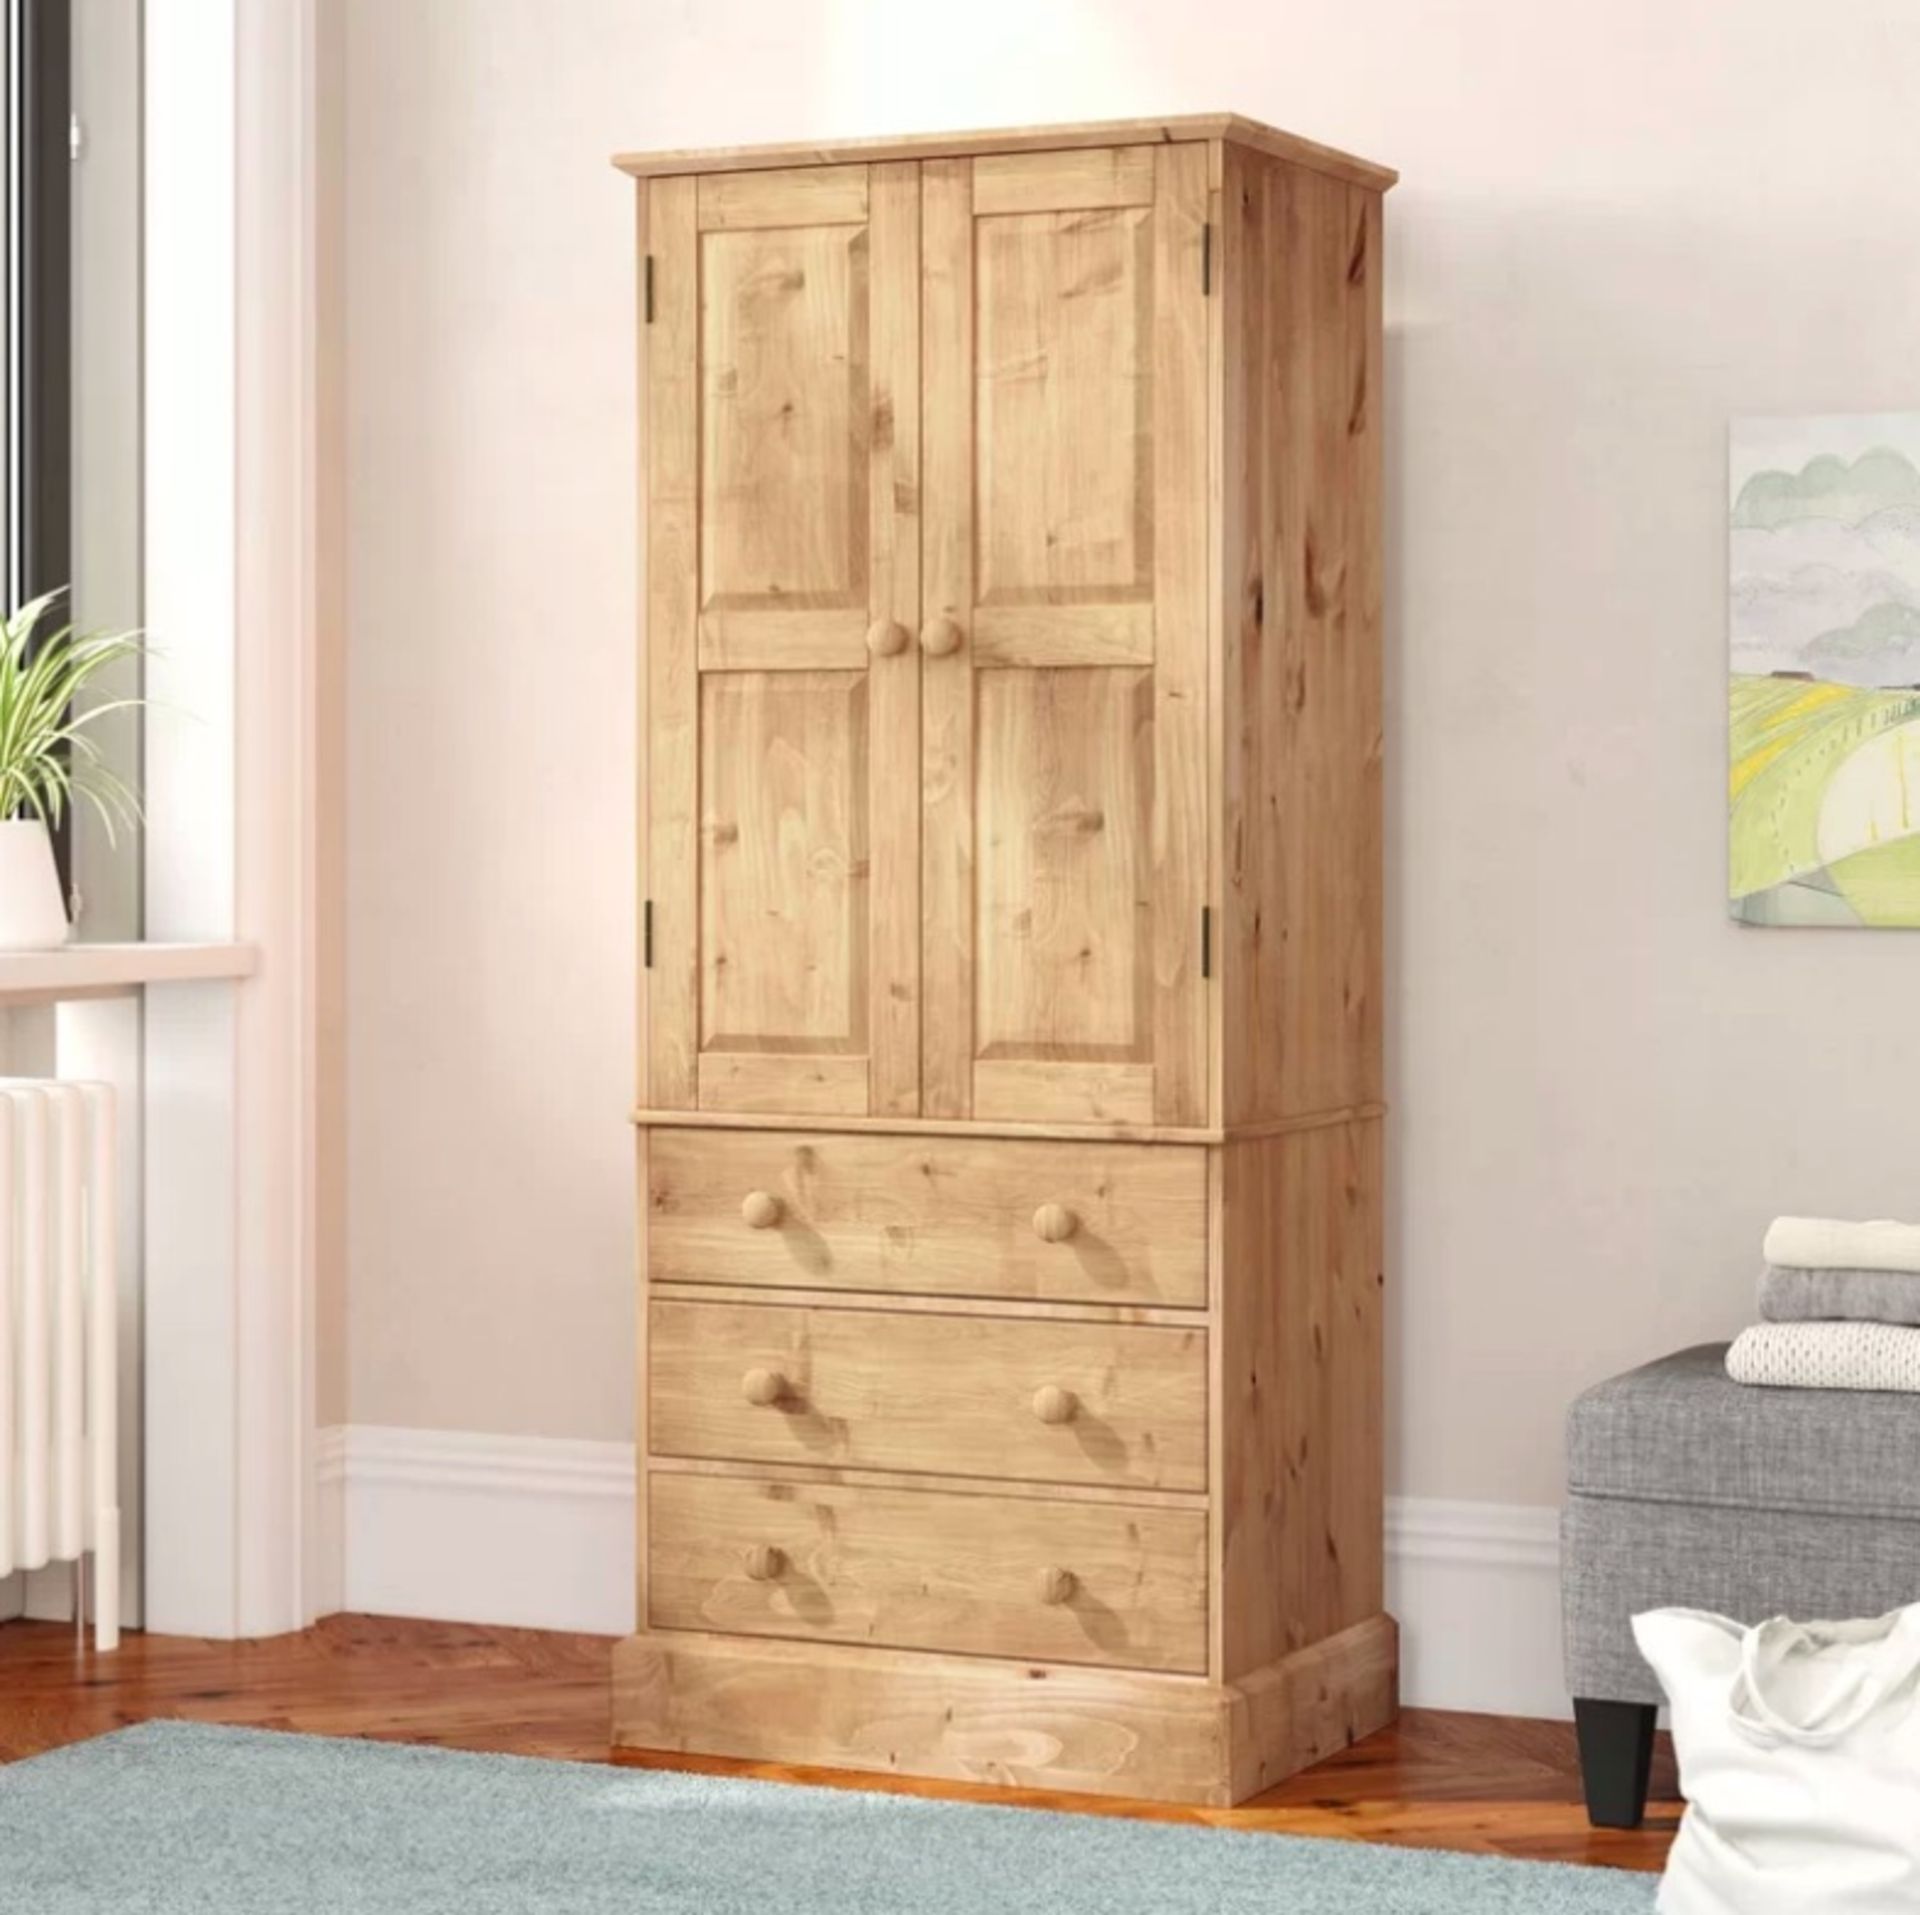 Classic 2 Door Wardrobe Beautiful And Classic Addition To Any Bedroom, This Two Door Three Drawer